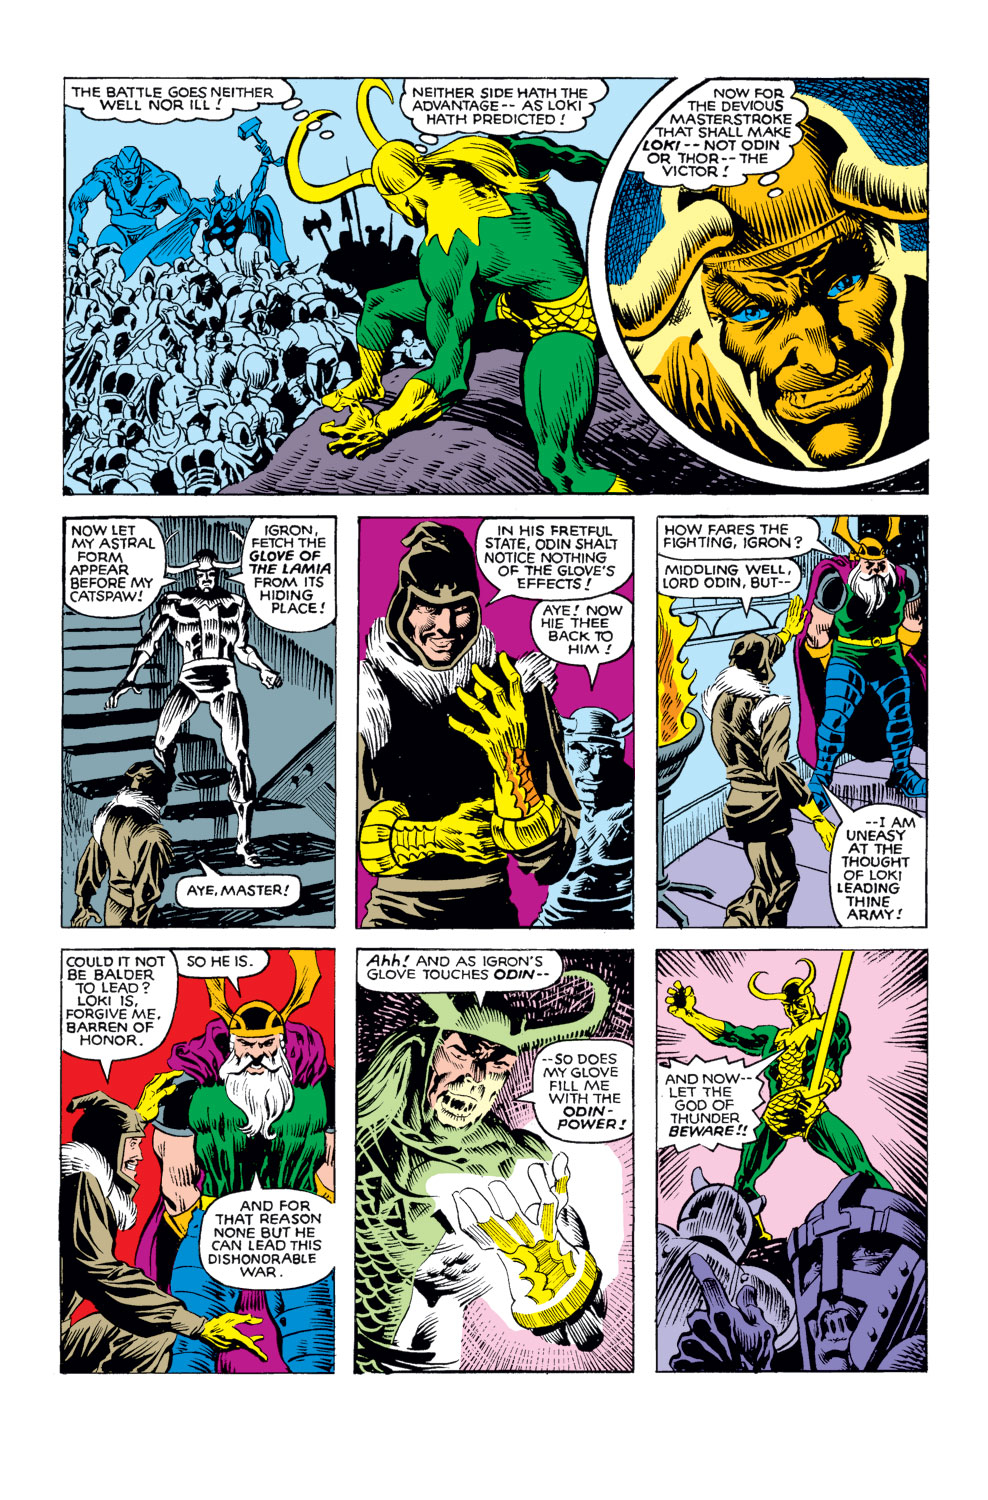 What If? (1977) issue 25 - Thor and the Avengers battled the gods - Page 24